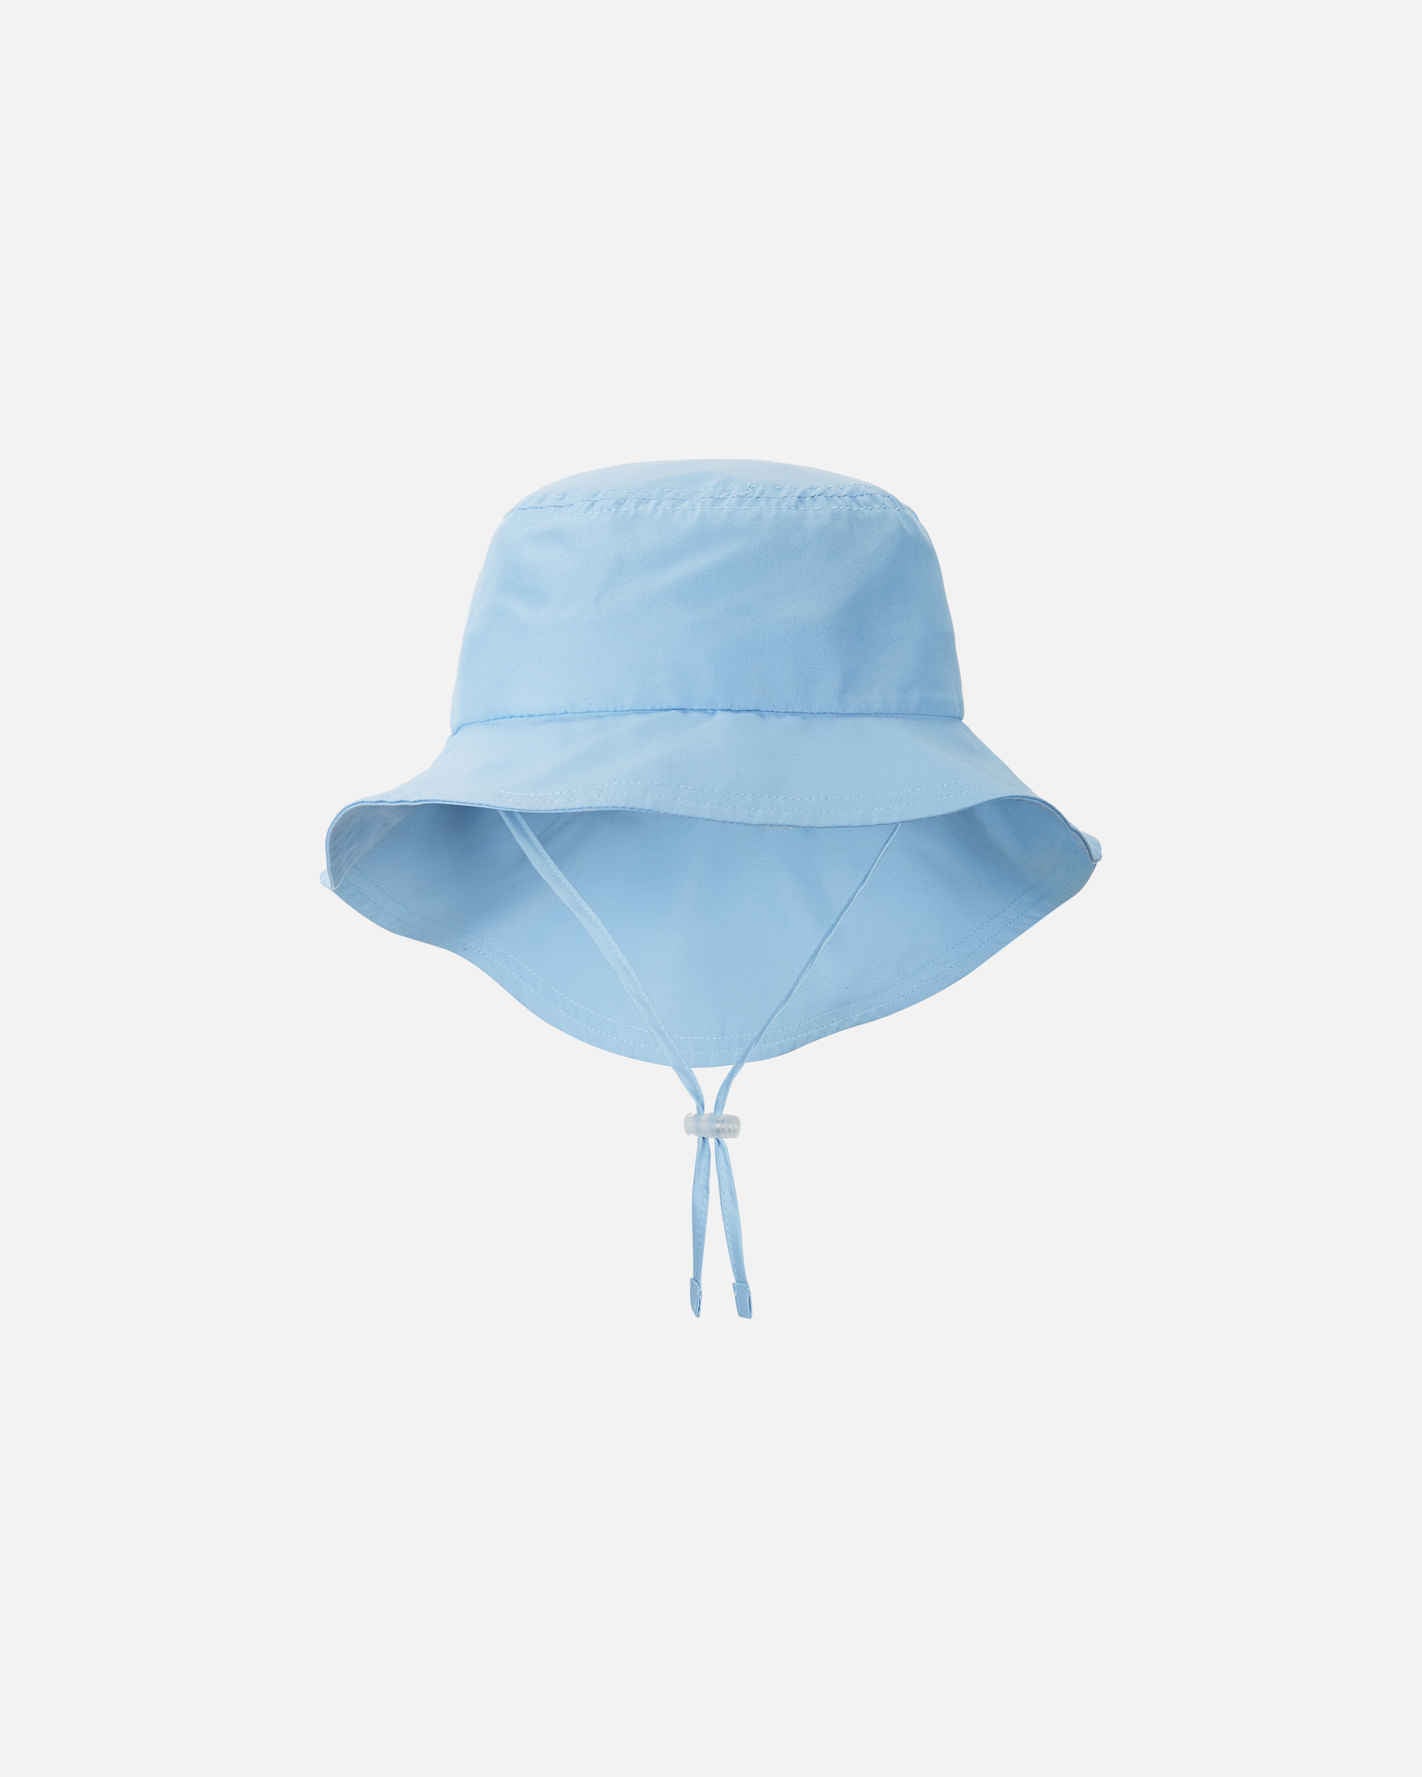 Children's Sun Hats - Stylish Protection from the Sun